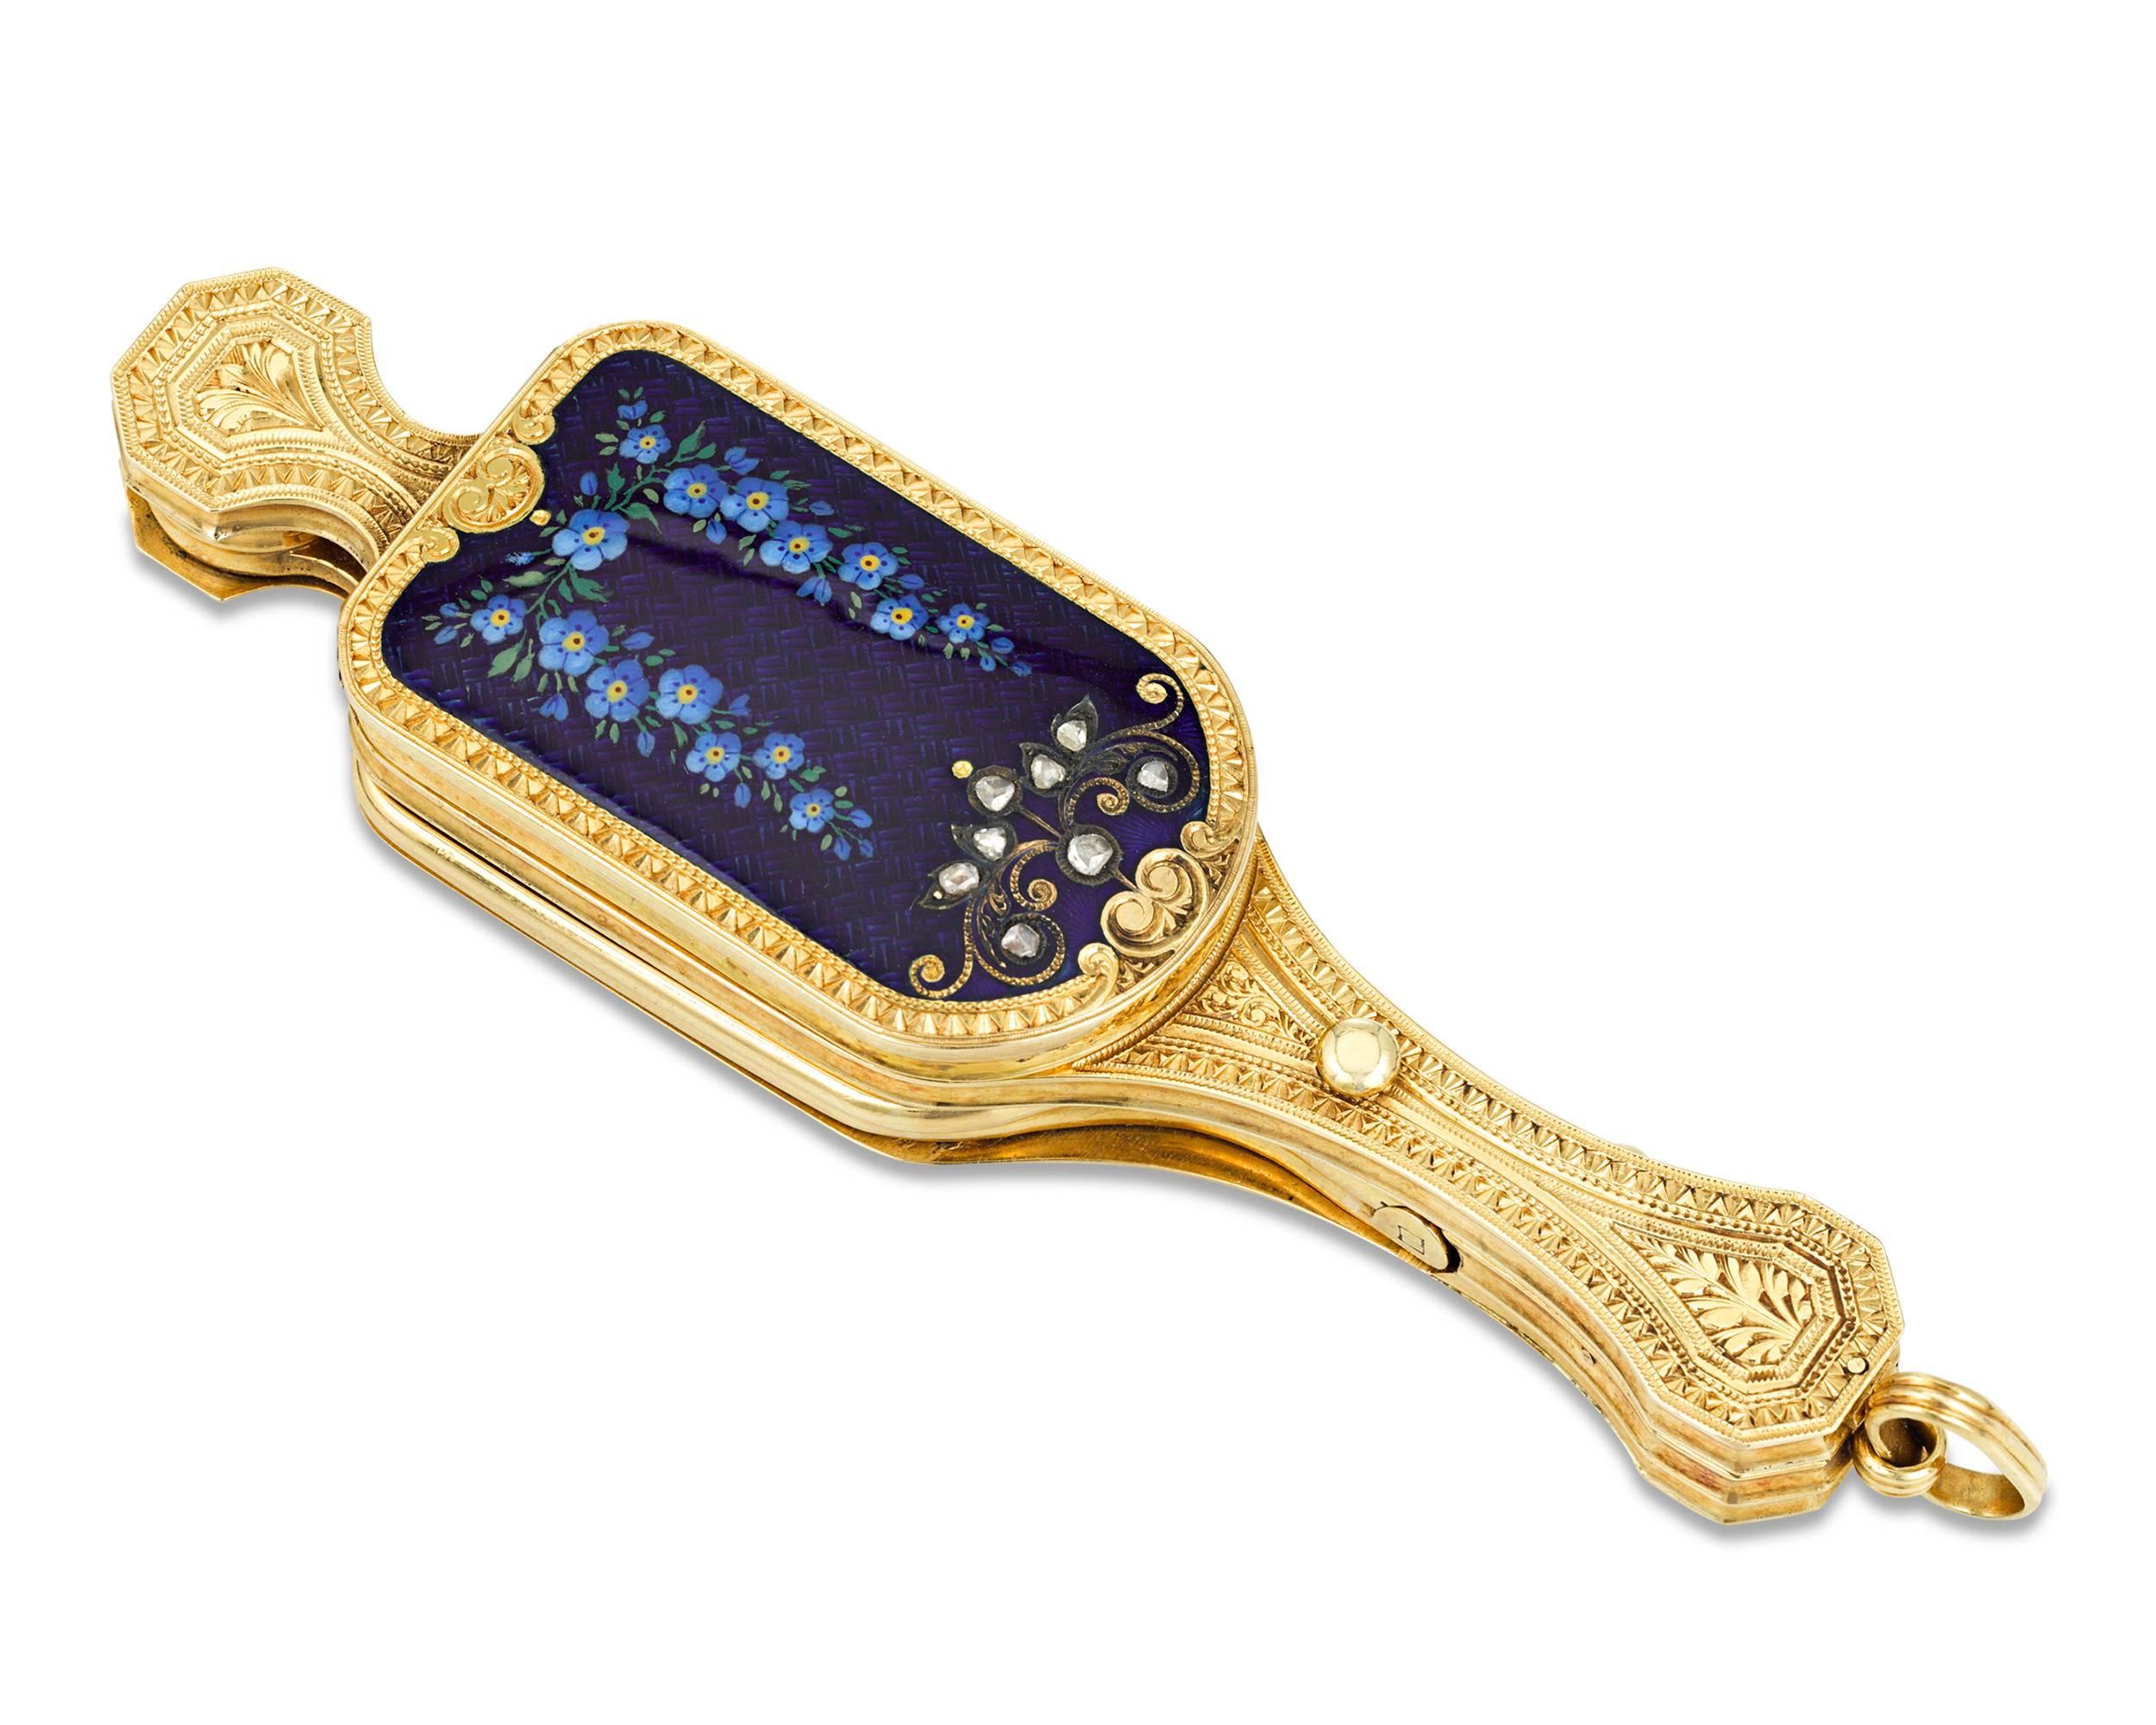 This masterfully crafted gold lorgnette is an exemplary specimen of Swiss workmanship. Crafted in the manner of the renowned Rossel & Fils, the enchanting piece is formed of meticulously worked 18K gold with exquisite guilloché enameling and diamond